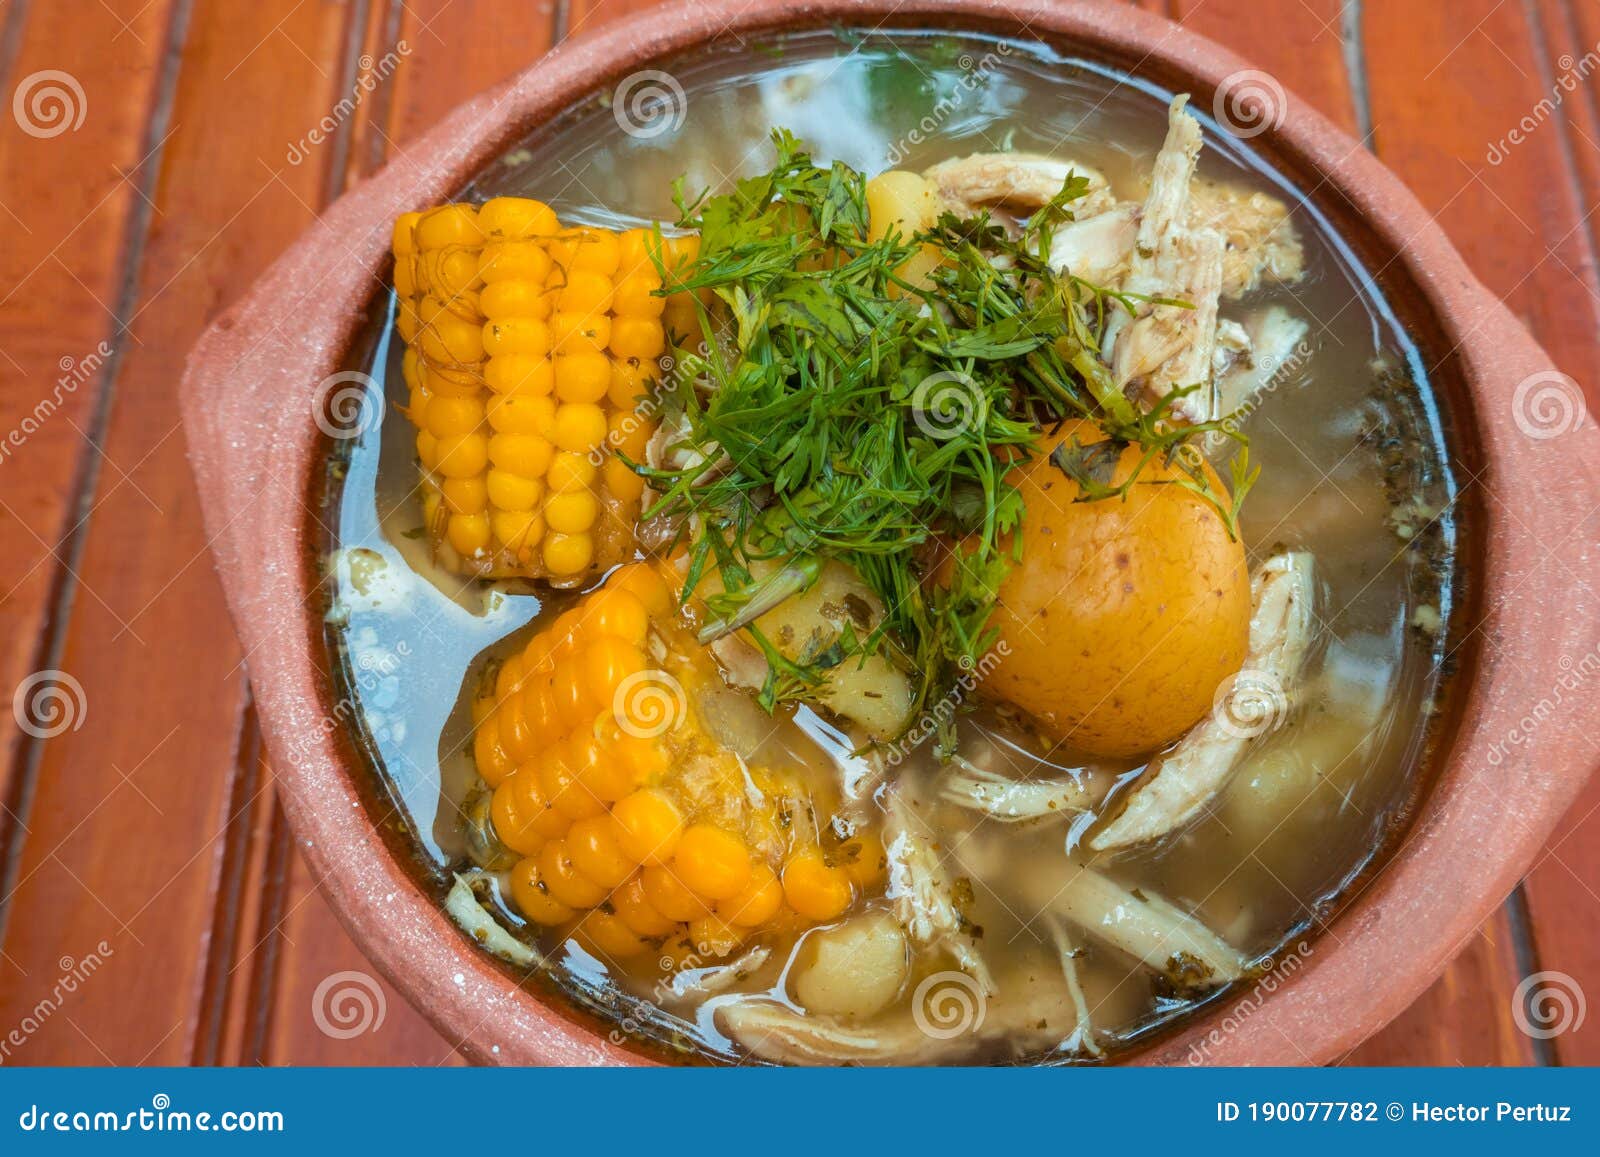 ajiaco colombiano. common chicken soup in colombia.